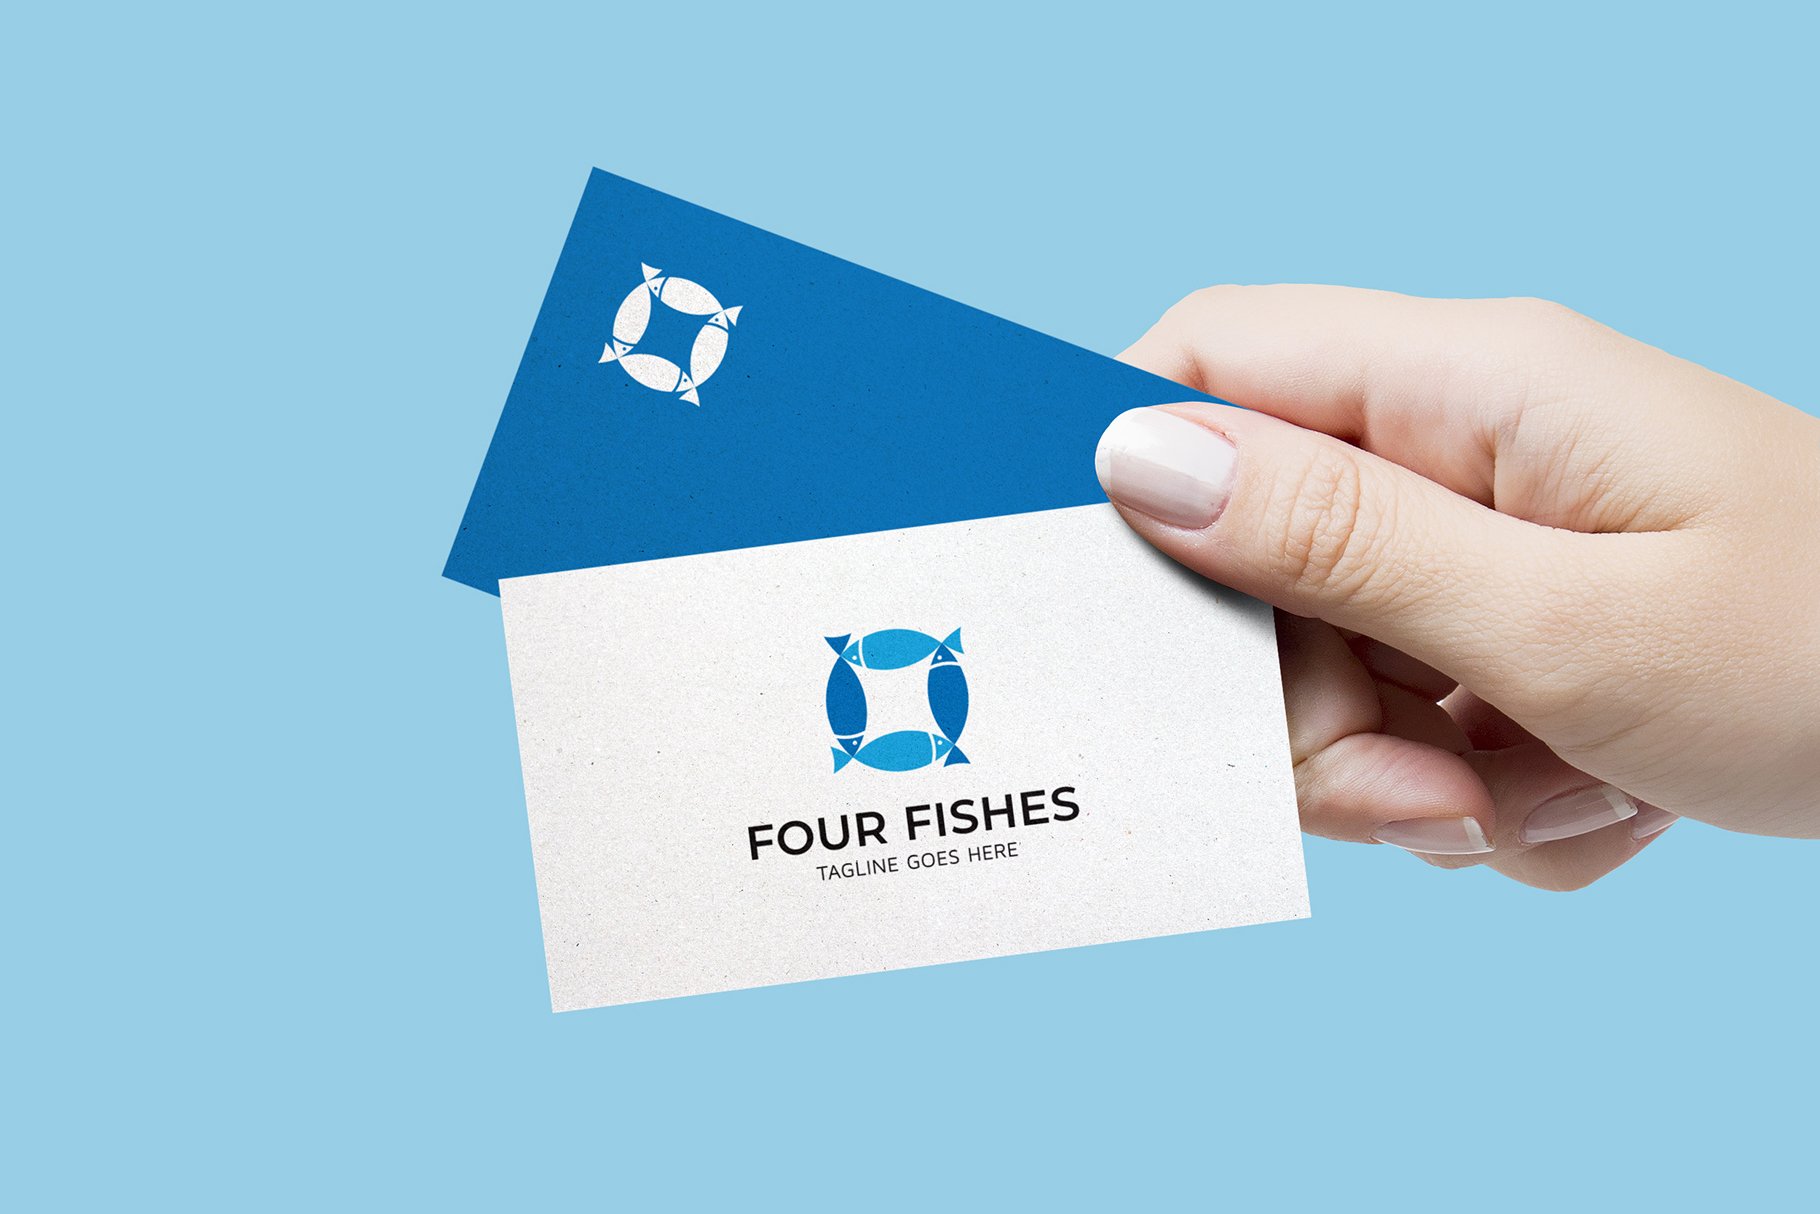 Modern blue fish logo on the business cards.